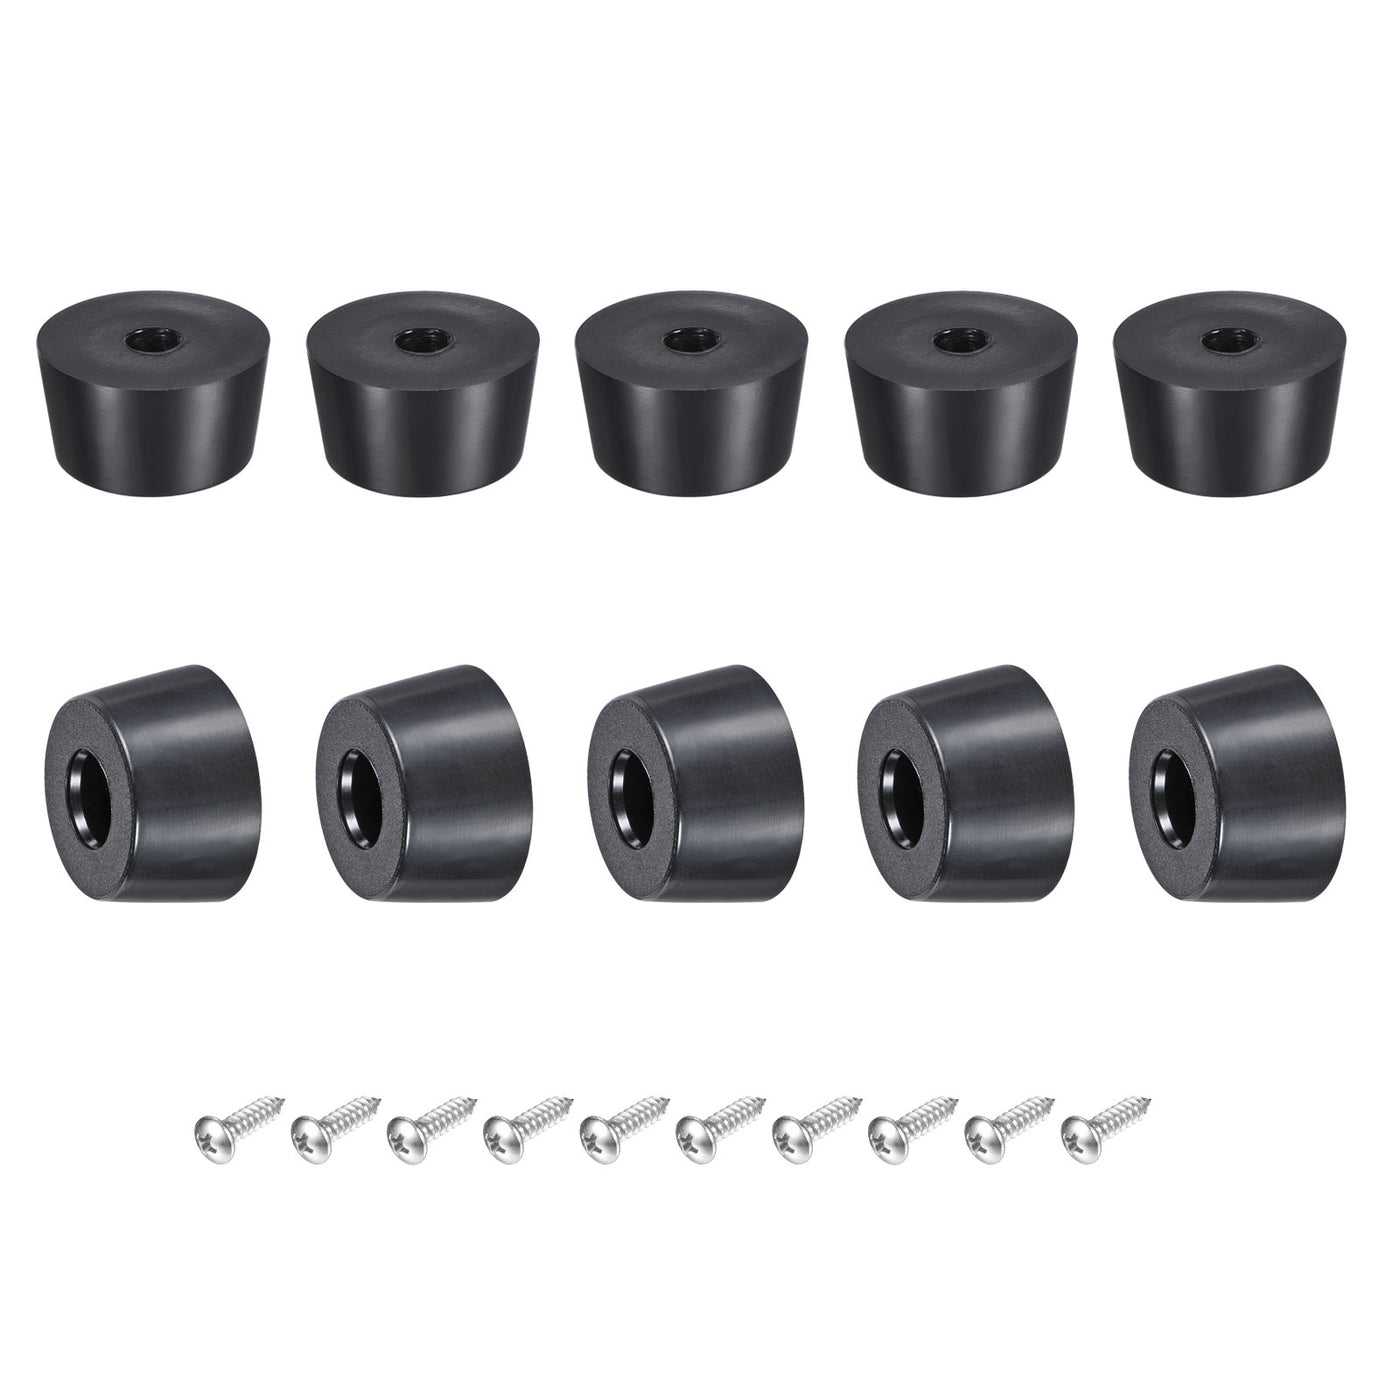 uxcell Uxcell Rubber Bumper Feet, 0.51" H x 0.98" W Round Pads with Stainless Steel Washer and Screws for Furniture, Appliances, Electronics 10 Pcs